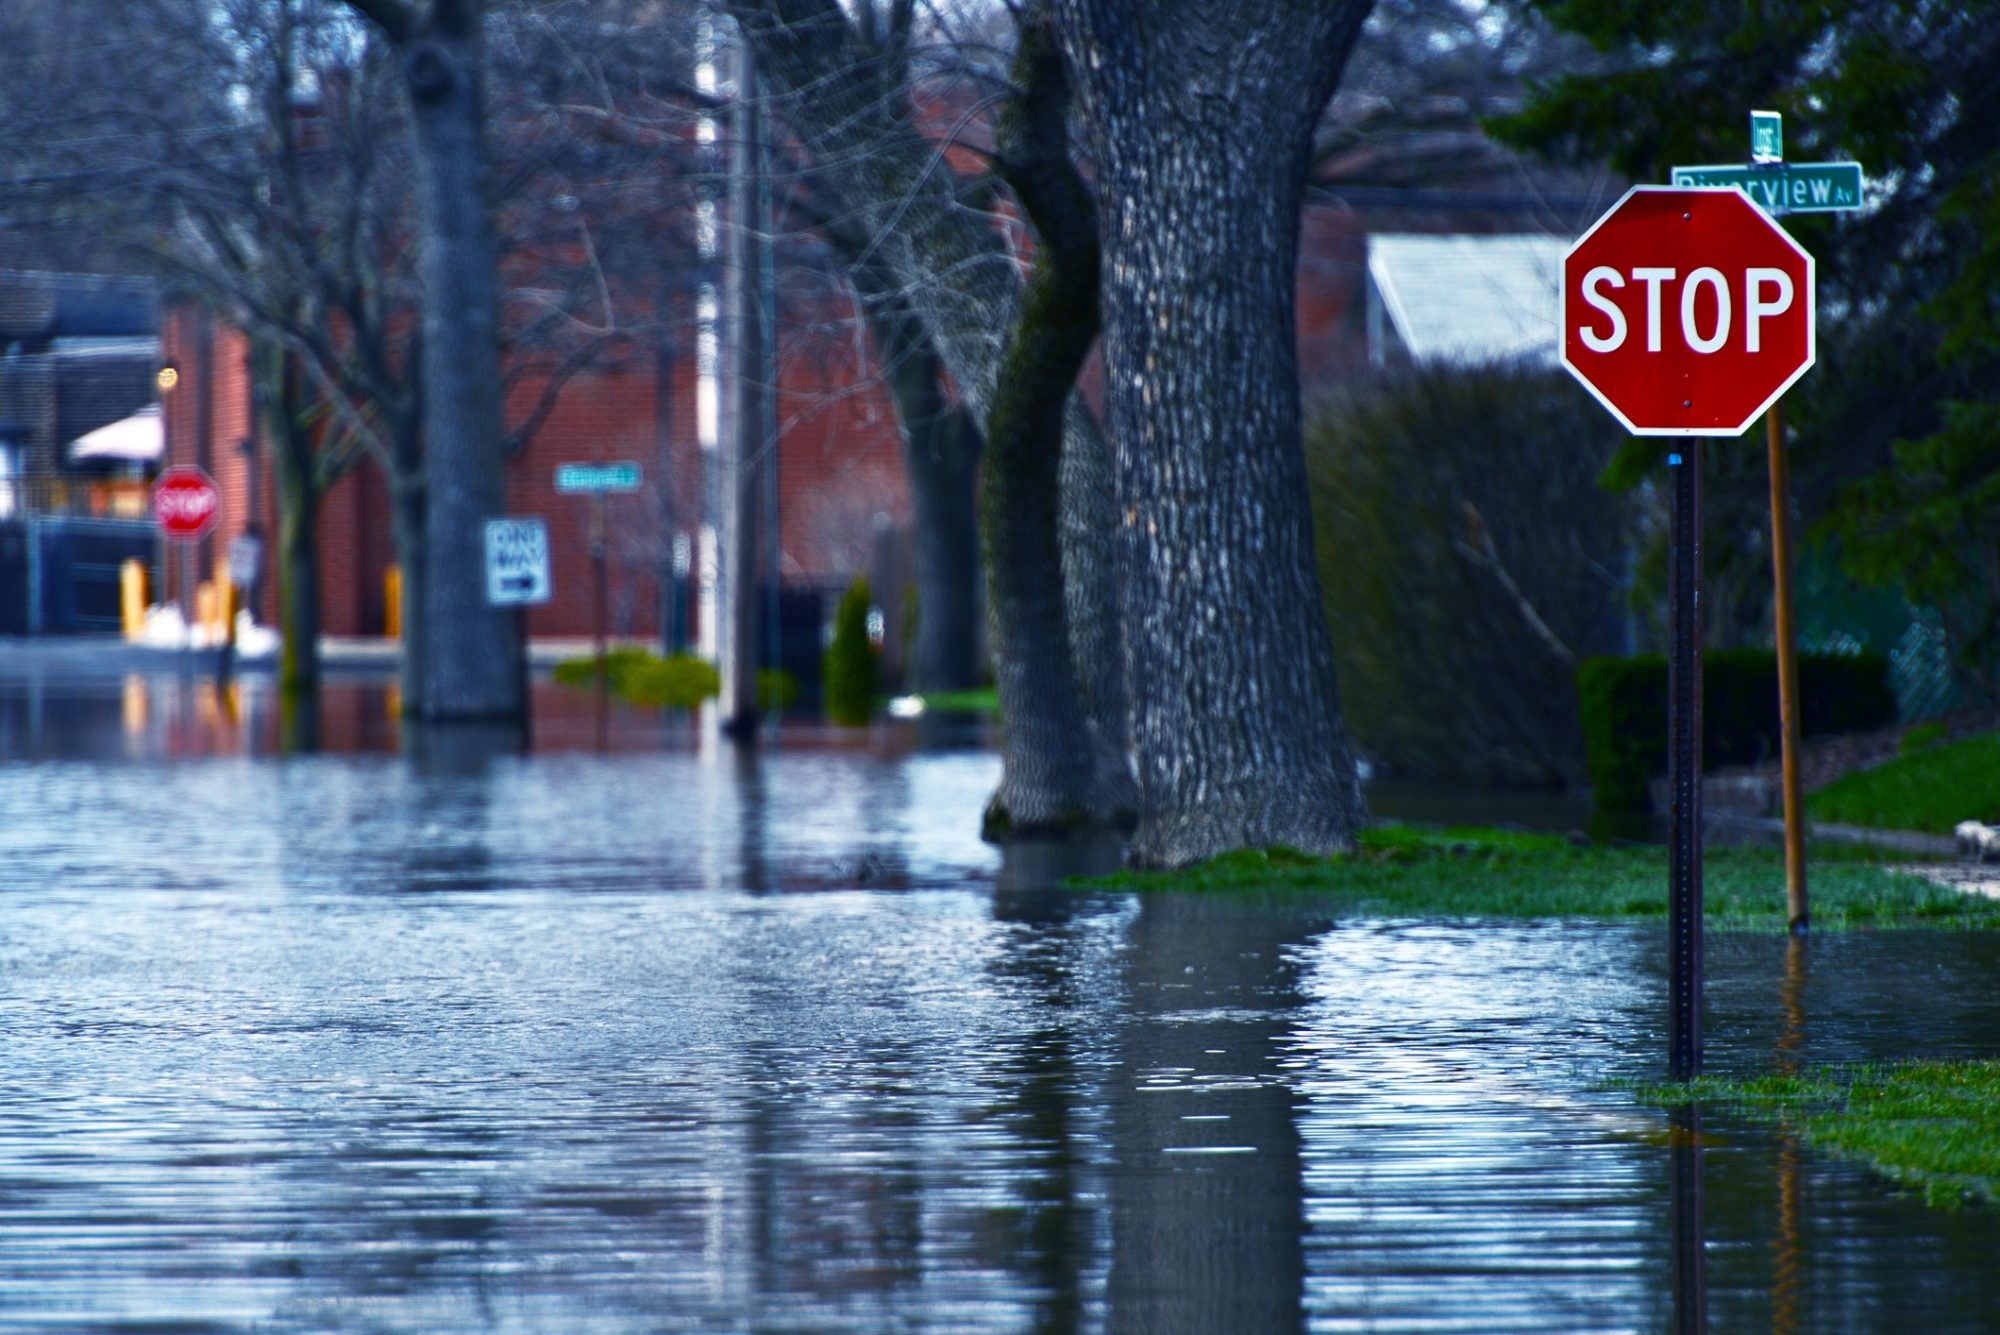 Climate change increases rainy days, which harm the economy - Open Access Government